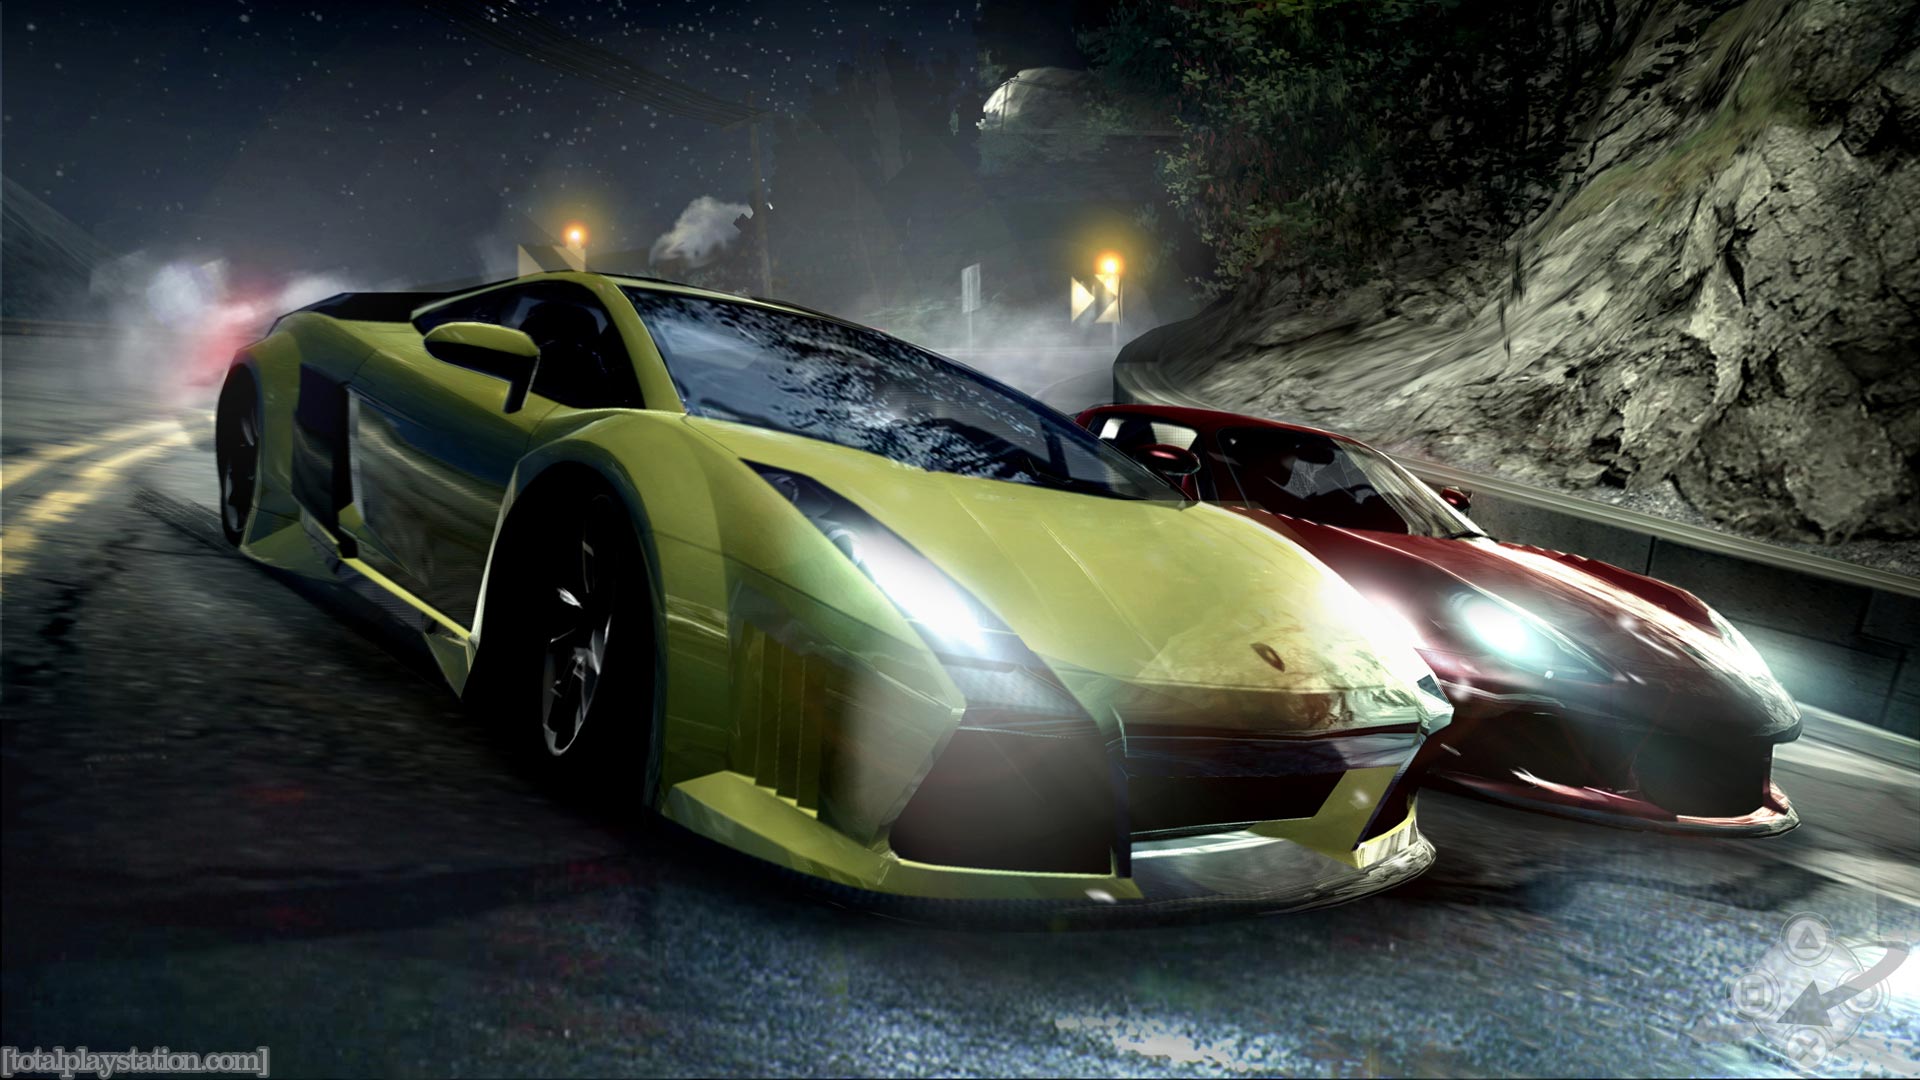 Need For Speed Carbon Wallpaper